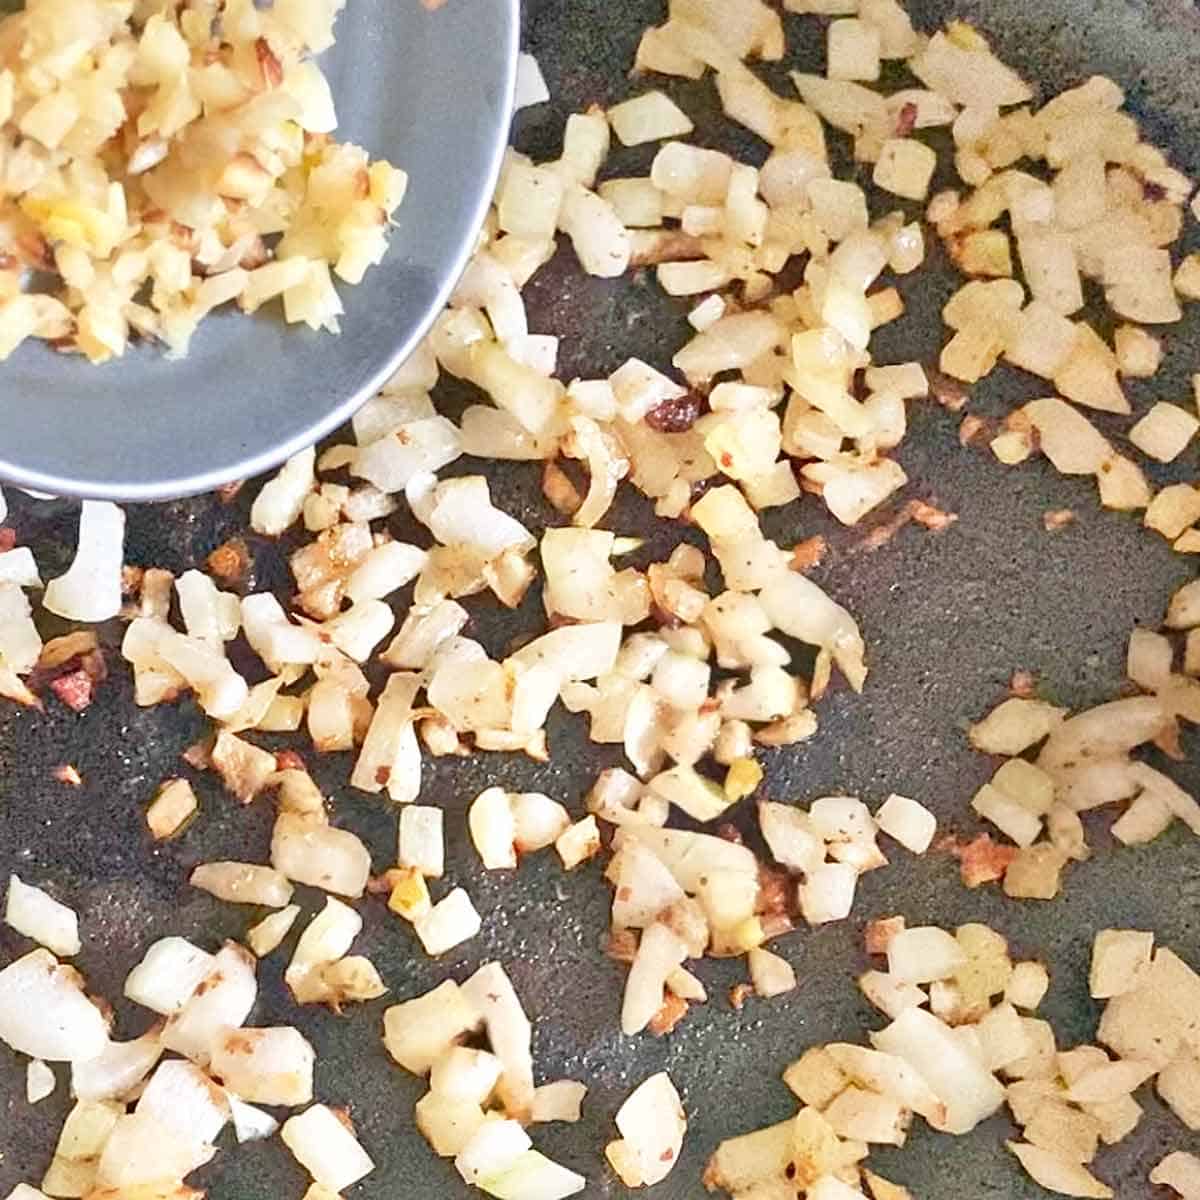 Adding chopped roasted garlic to a pan with caramelized chopped onions.